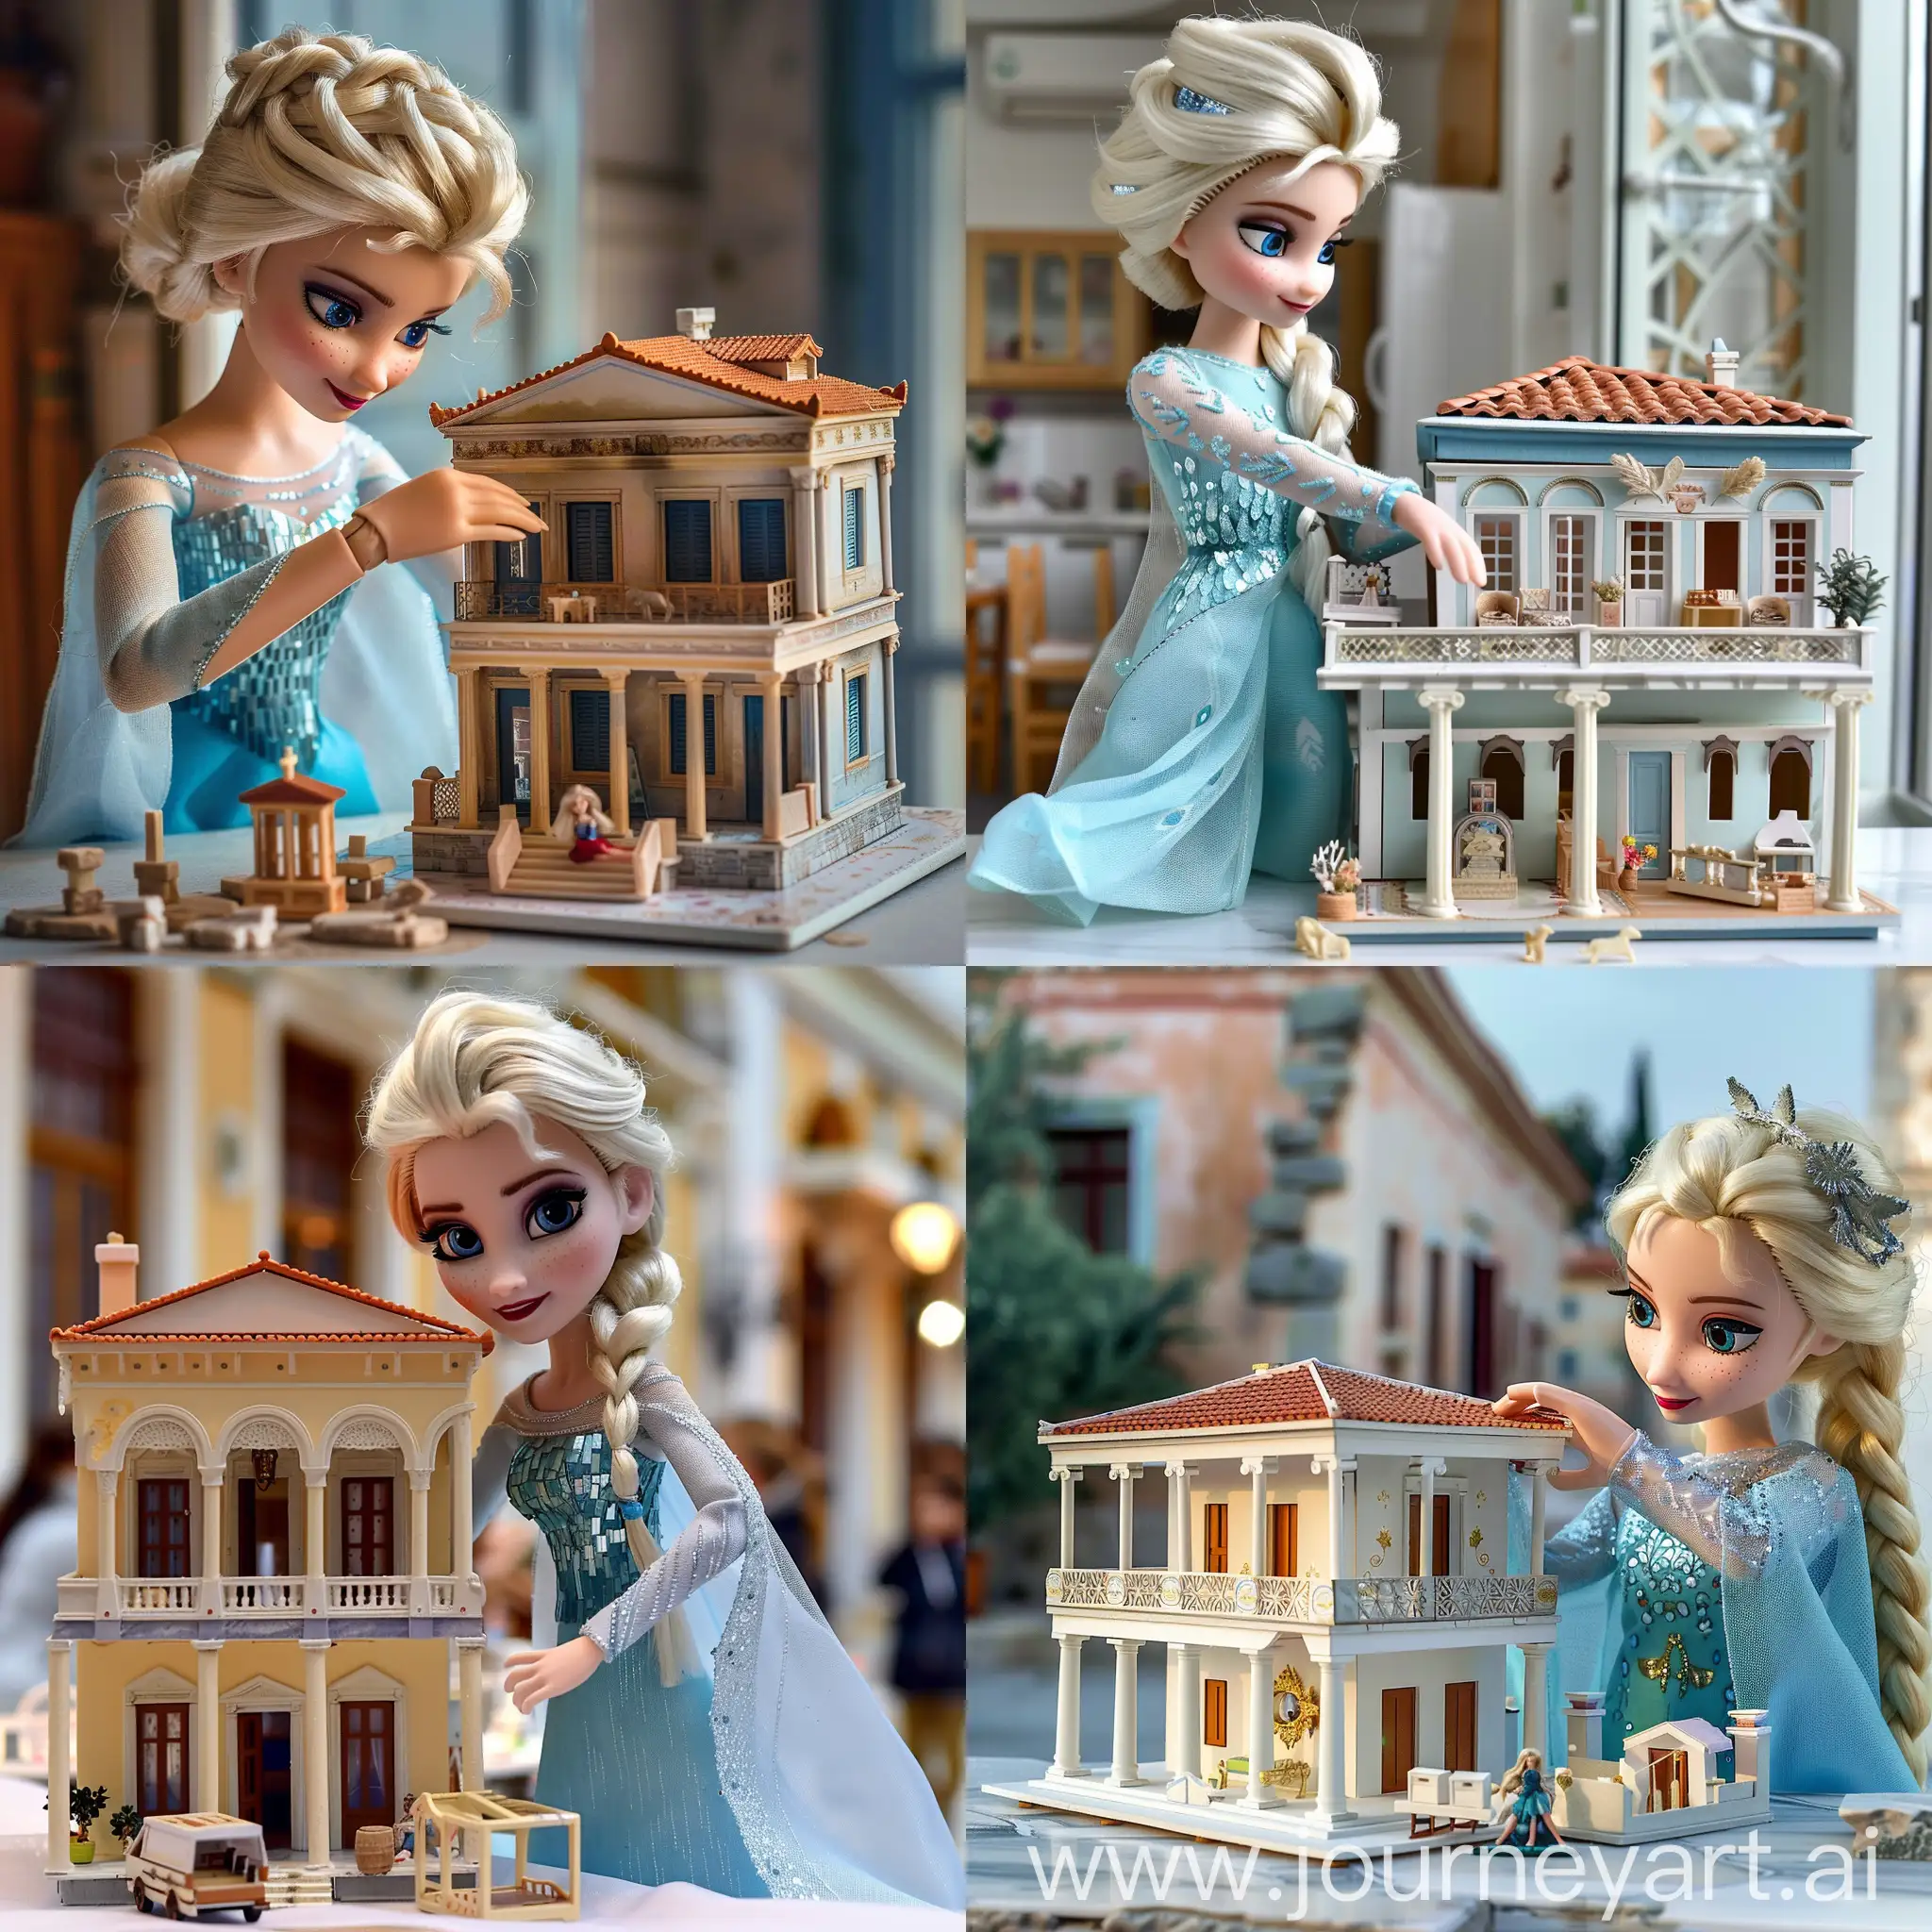 Elsa frozen is playing with a dollhouse in Athens Greece.